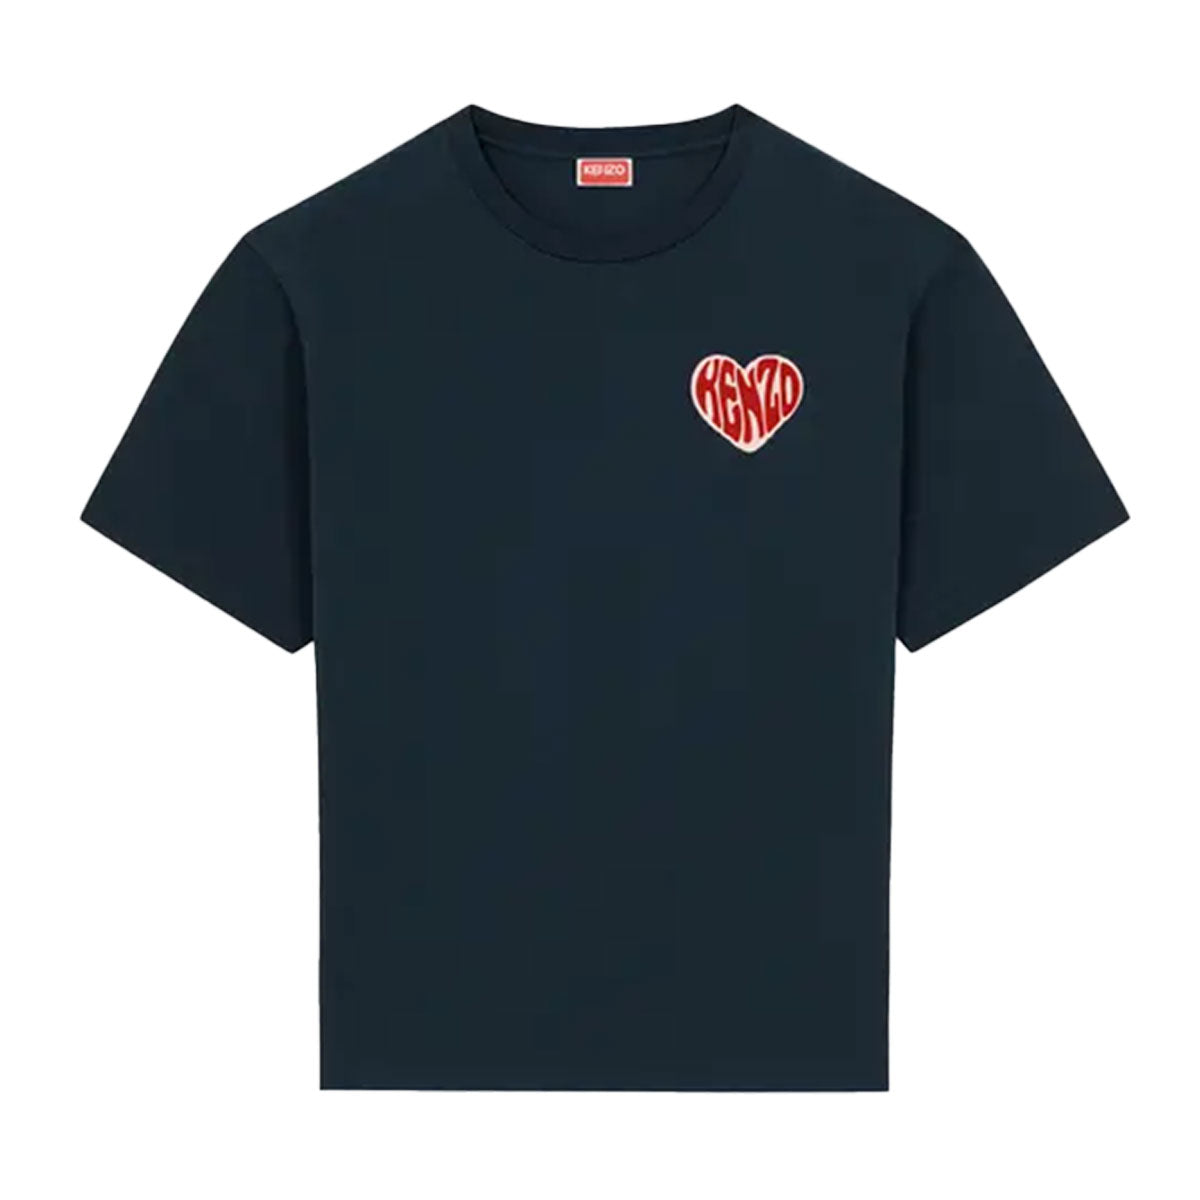 KENZO HEART オーバーサイズ Tシャツ | Why are you here?